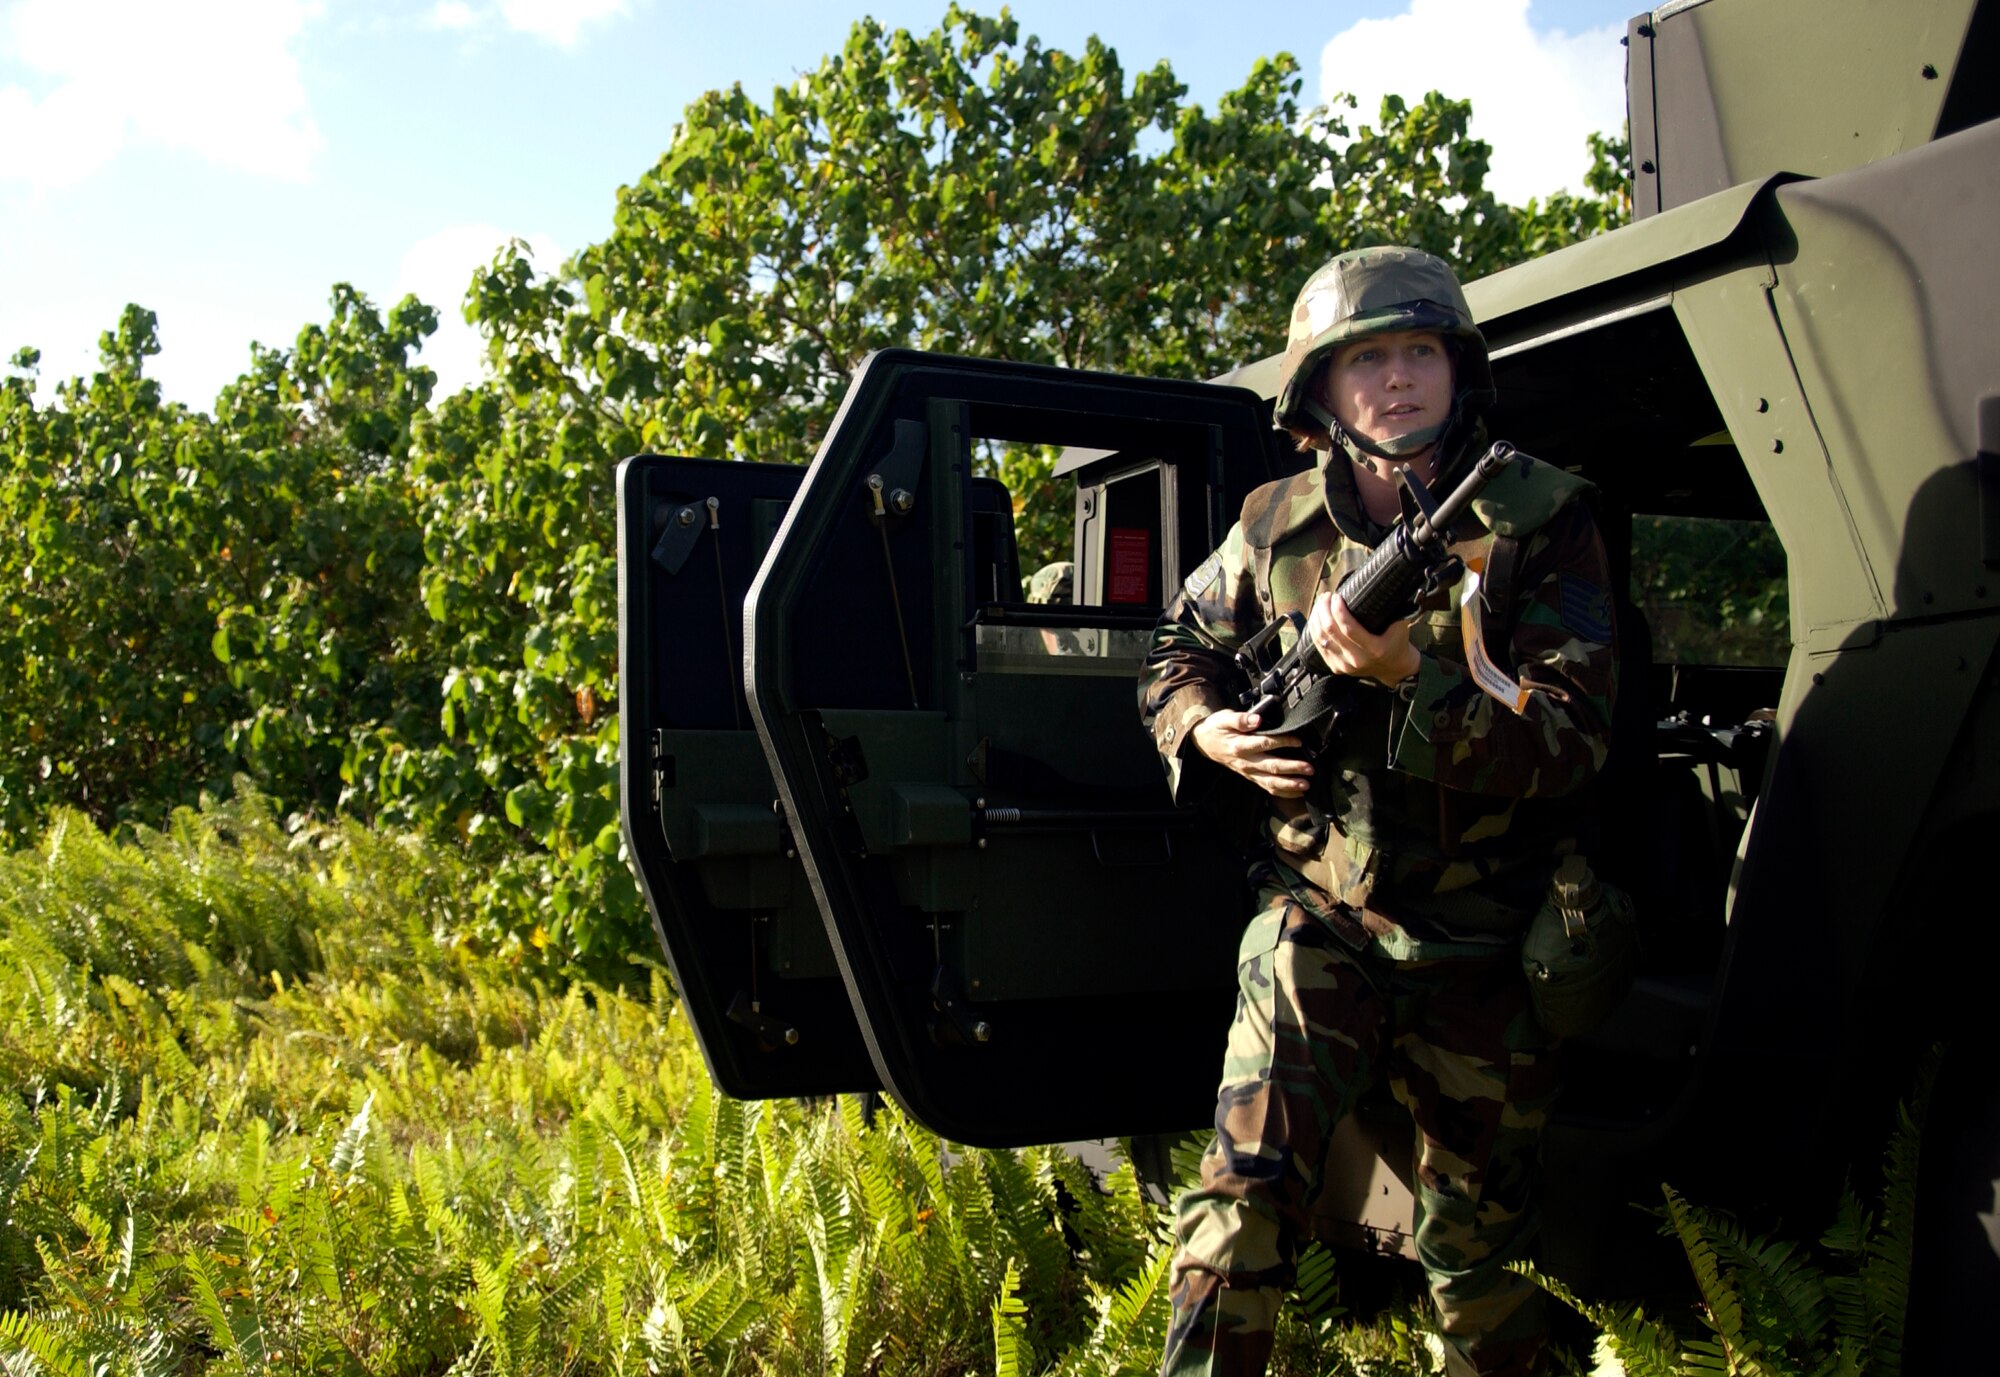 Tech. Sgt. Melissa Cervera participates in convoy and weapons familiarization training during the Guam Initial Readiness Response Exercise, or GIRRE, Tuesday, March 14, 2006. The GIRRE is an annual island-wide exercise between Andersen Air Force Base and Naval Marianas to train on war plan deployments and joint disaster response skills. During the GIRRE, 300 Air Expeditionary Force Airmen will participate under conditions they may see when deployed. The mission of this exercise is readiness and to prepare AEF Airmen with skills they can use to keep alive downrange while working with Navy and Government of Guam agencies on disaster response to save lives at home. (U.S. Air Force photo/Airman 1st Class Miranda Moorer)